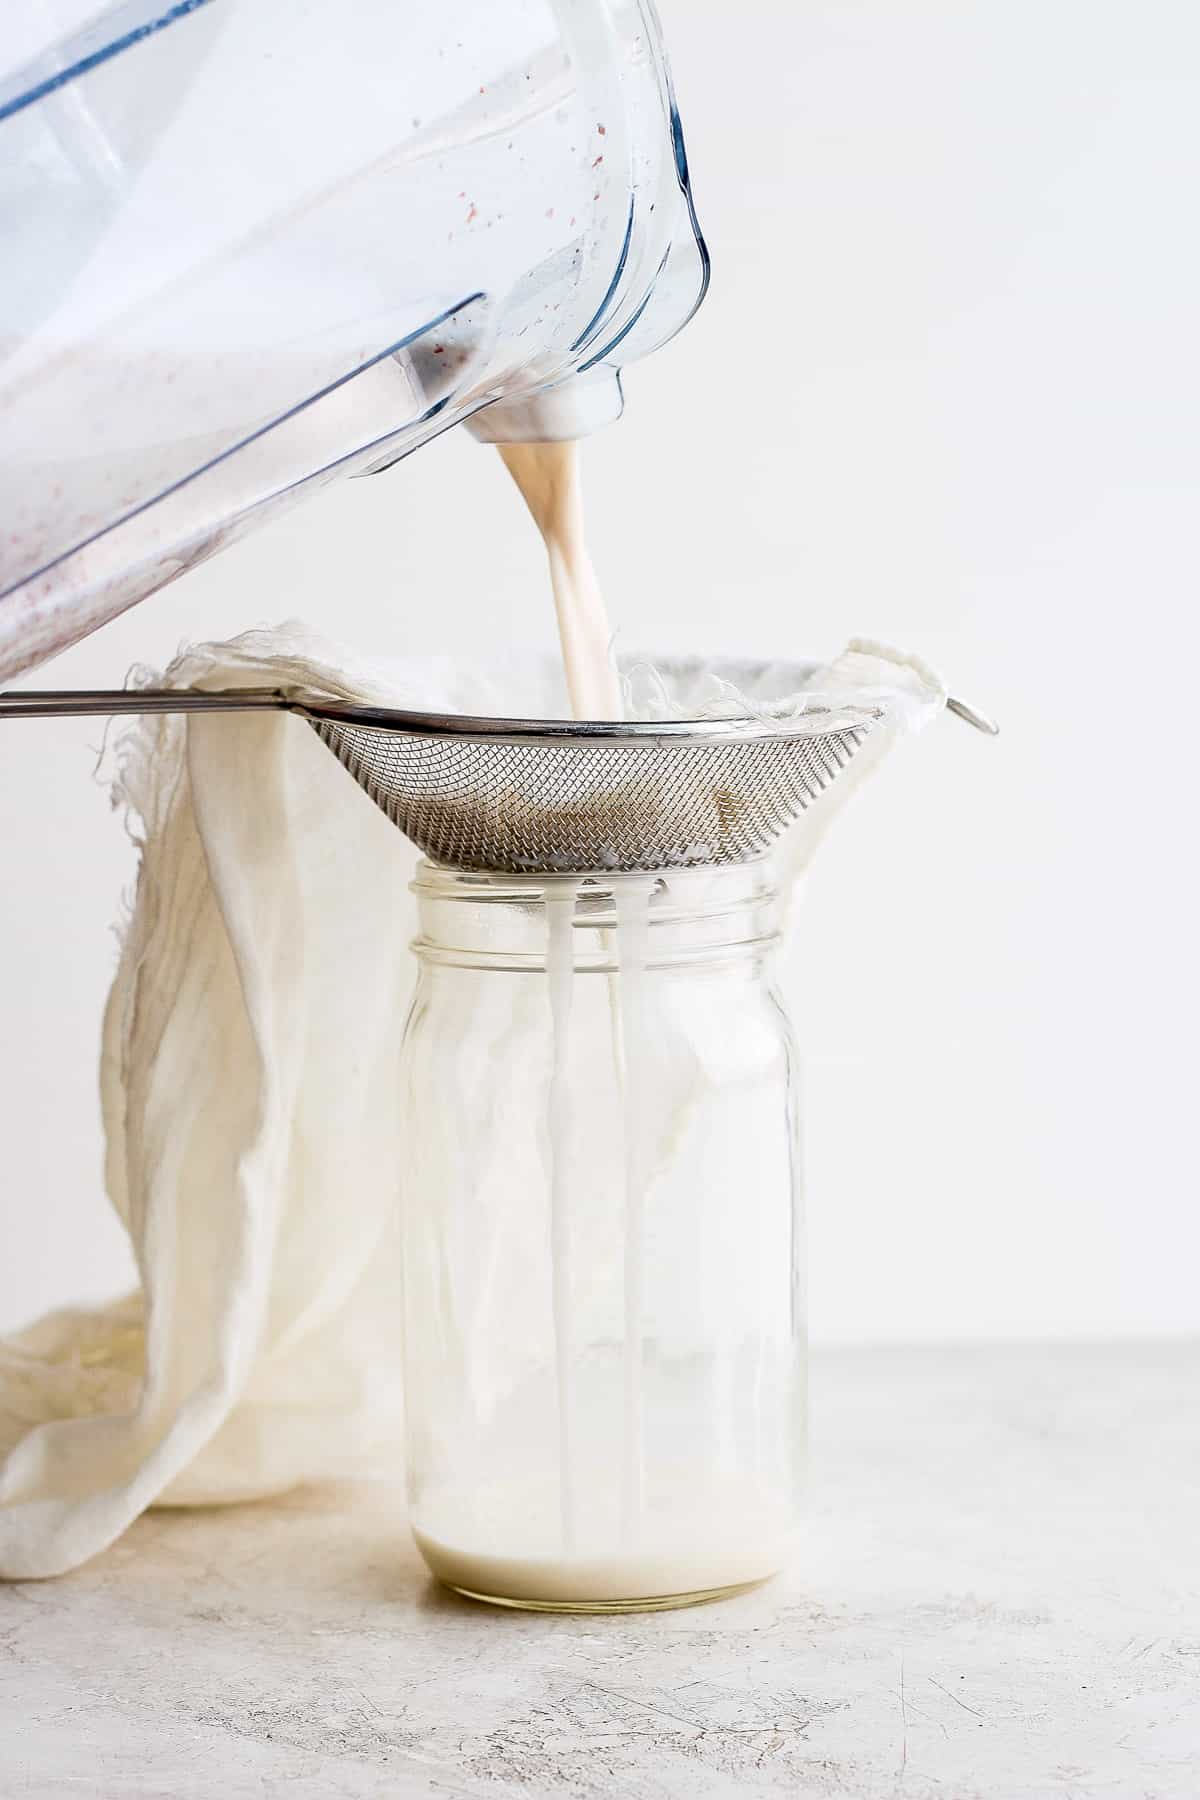 Straining almond milk in a cheese cloth